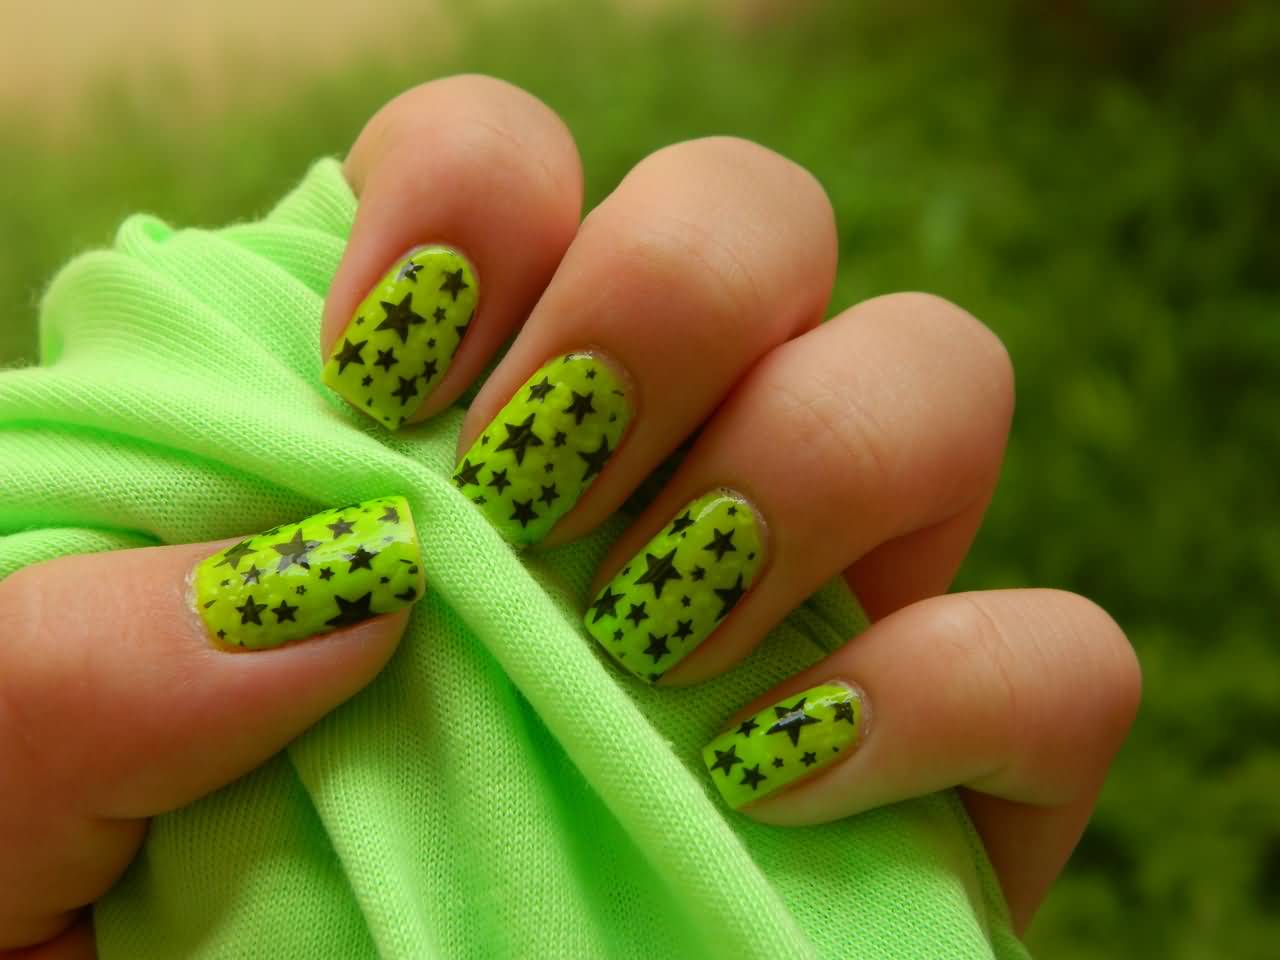 10. "Rebellious Black and Neon Nail Design with Graffiti Accents" - wide 7